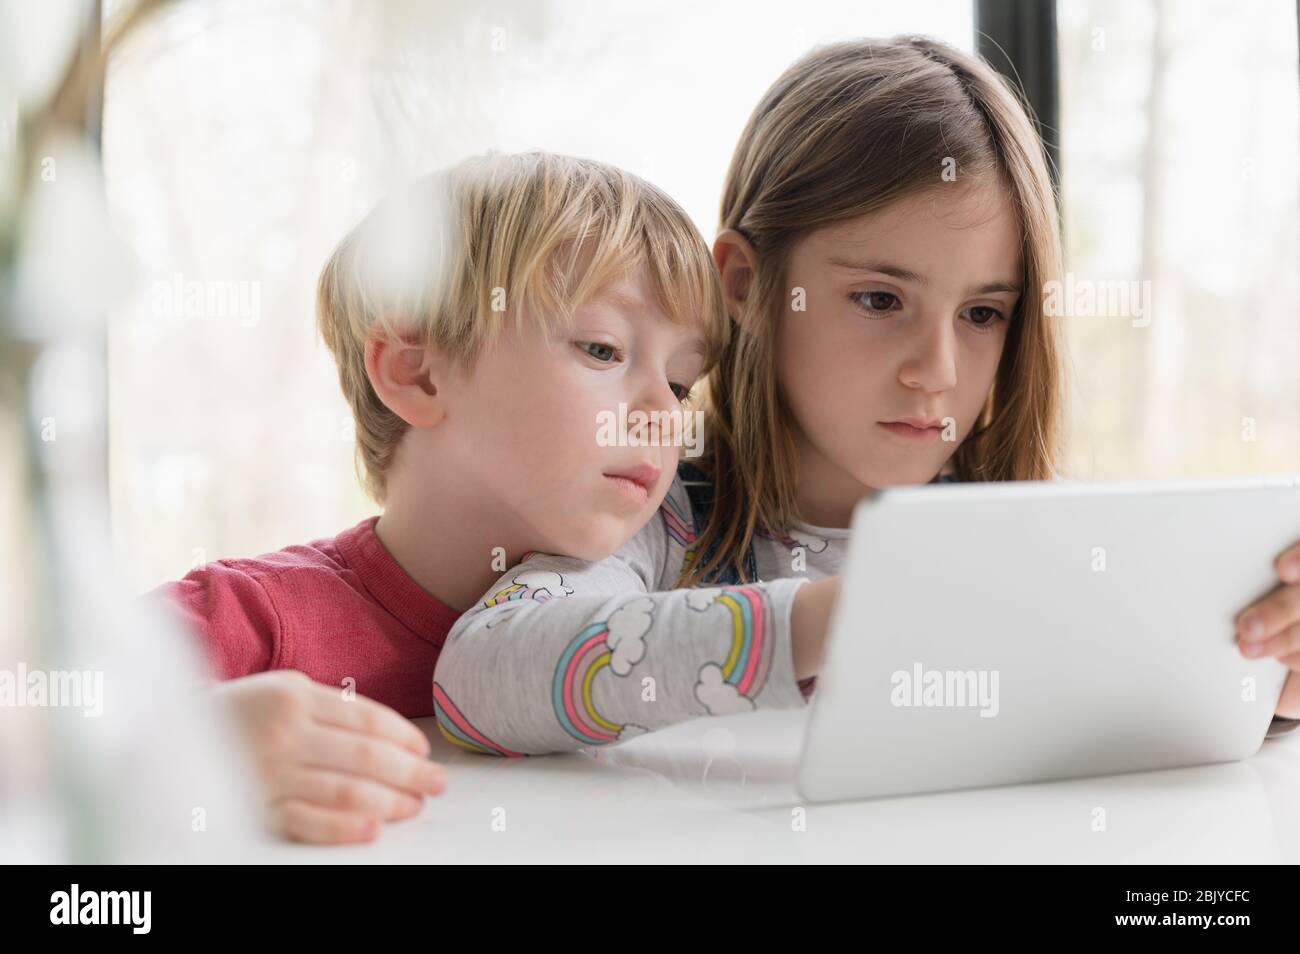 Children looking at tablet together Stock Photo